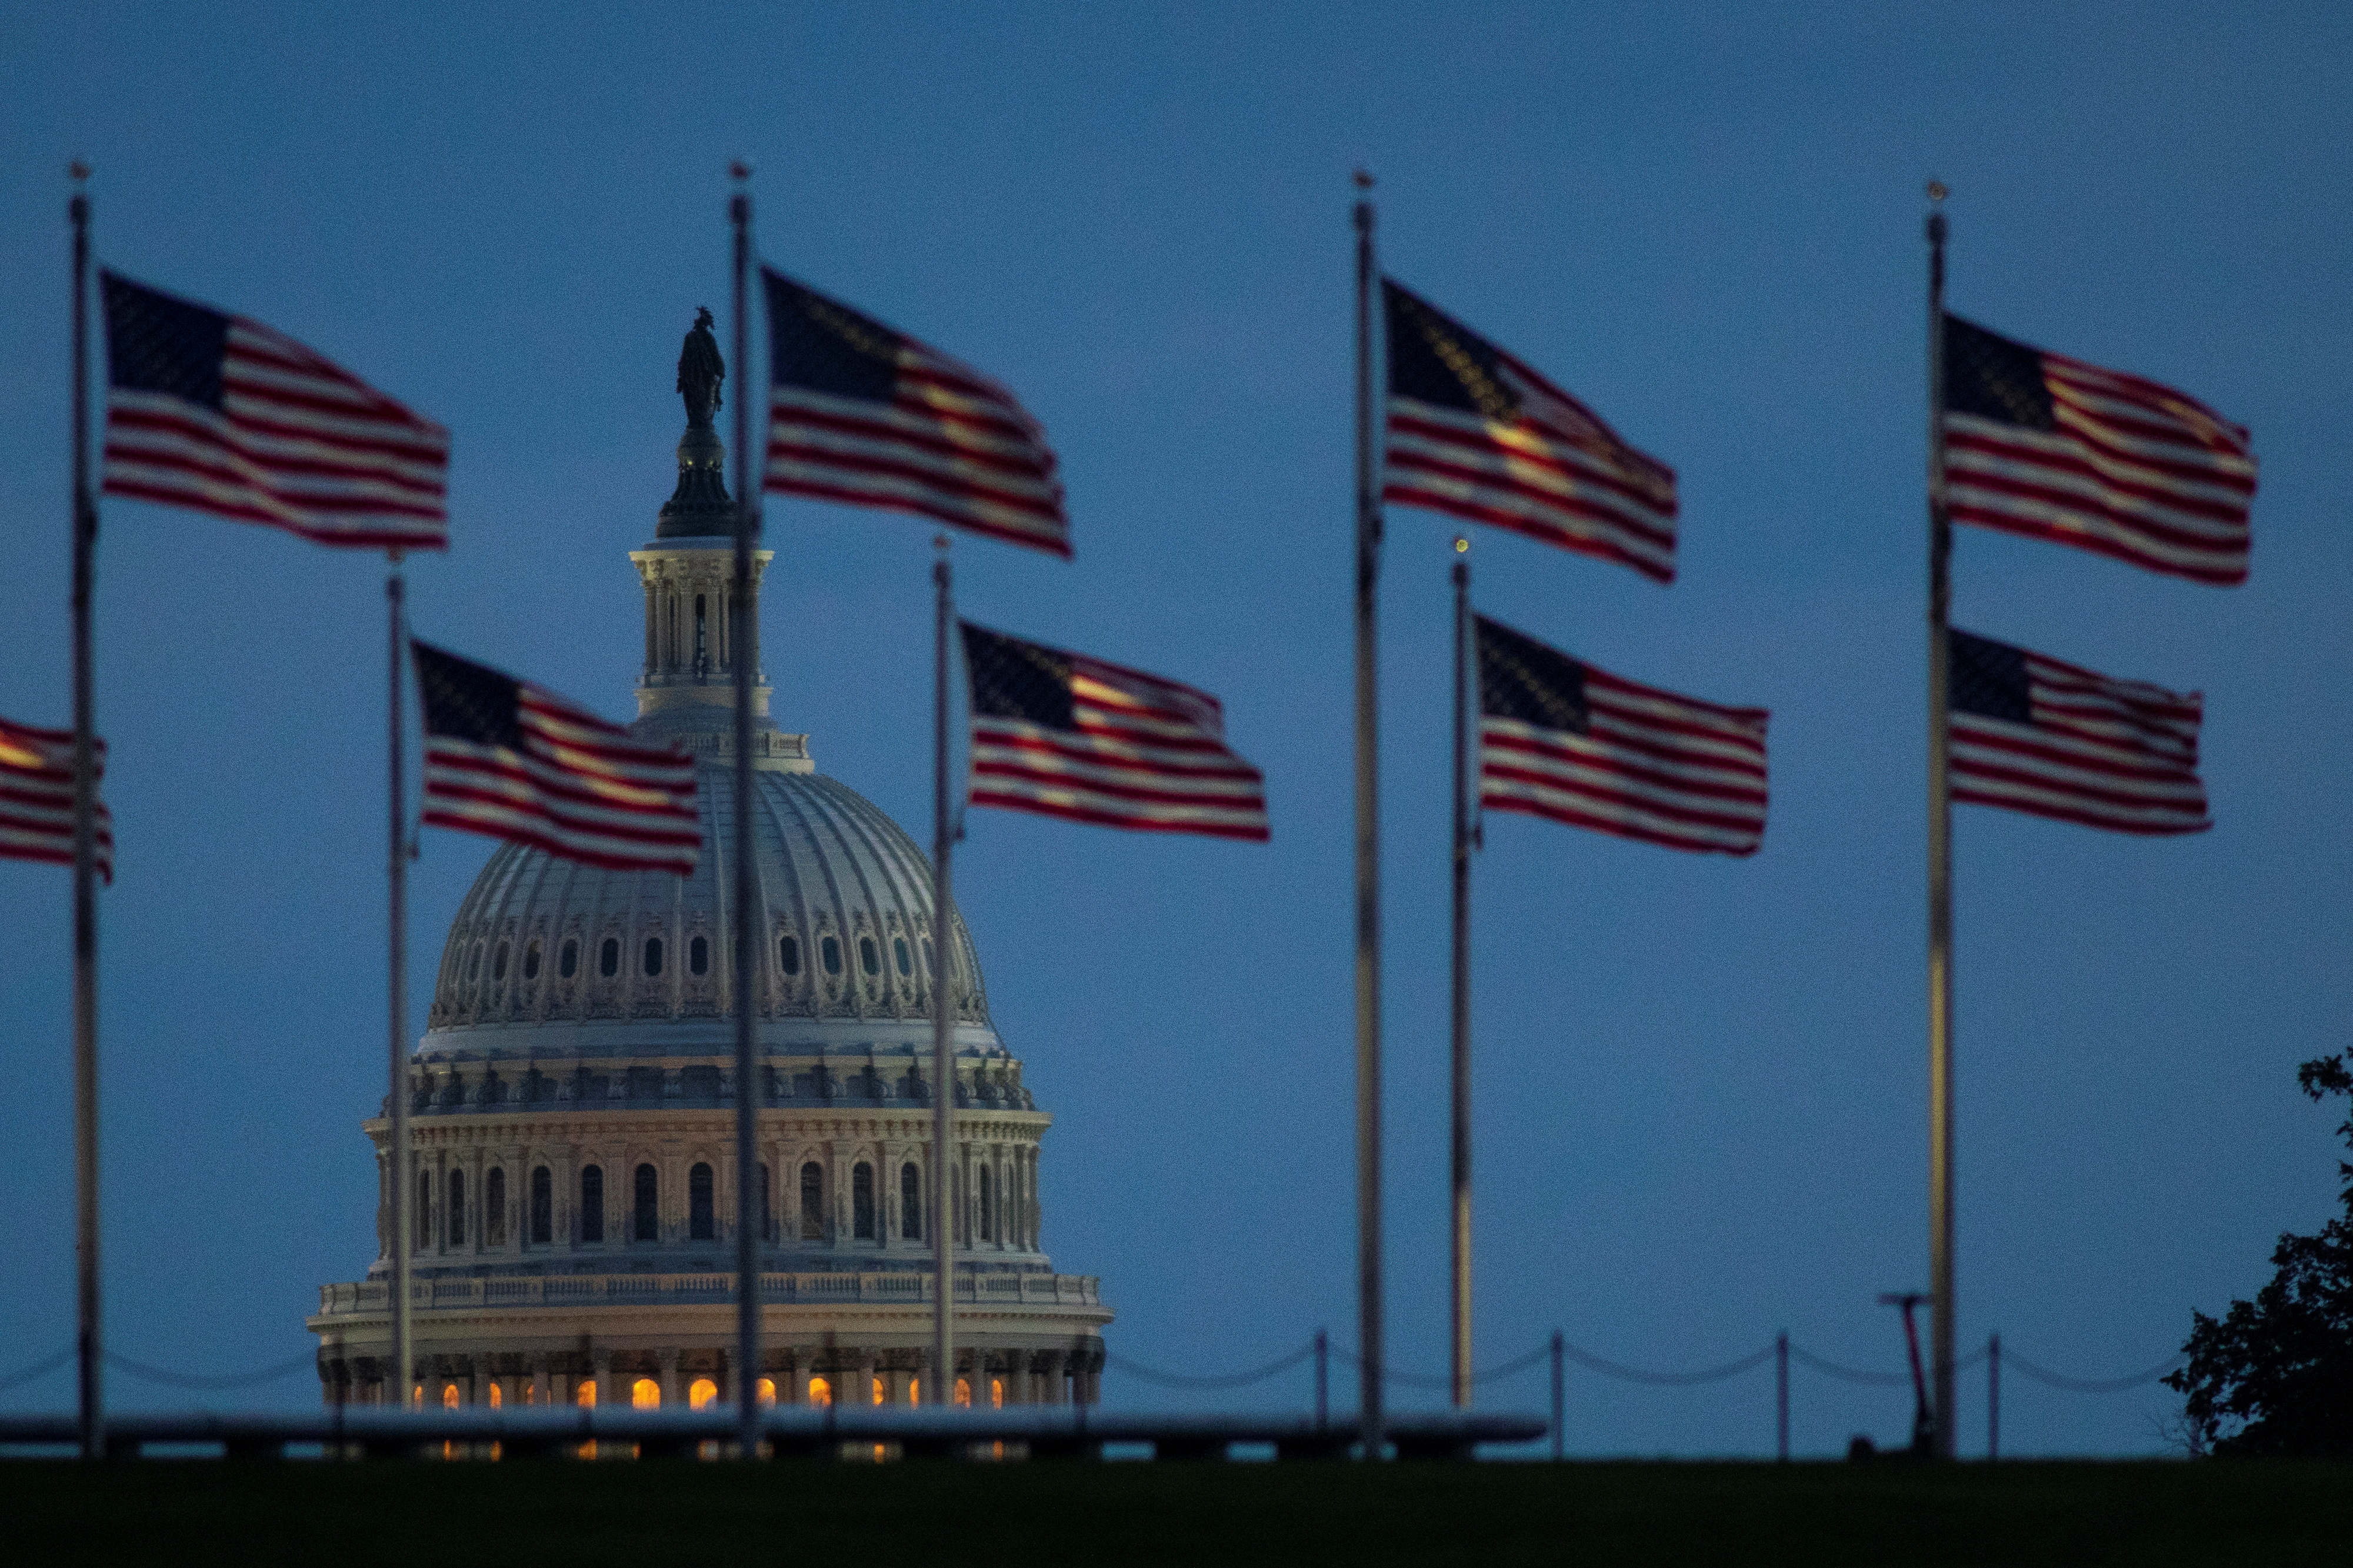 The U.S. Capitol building is seen illuminated at dawn along the National Mall in Washington